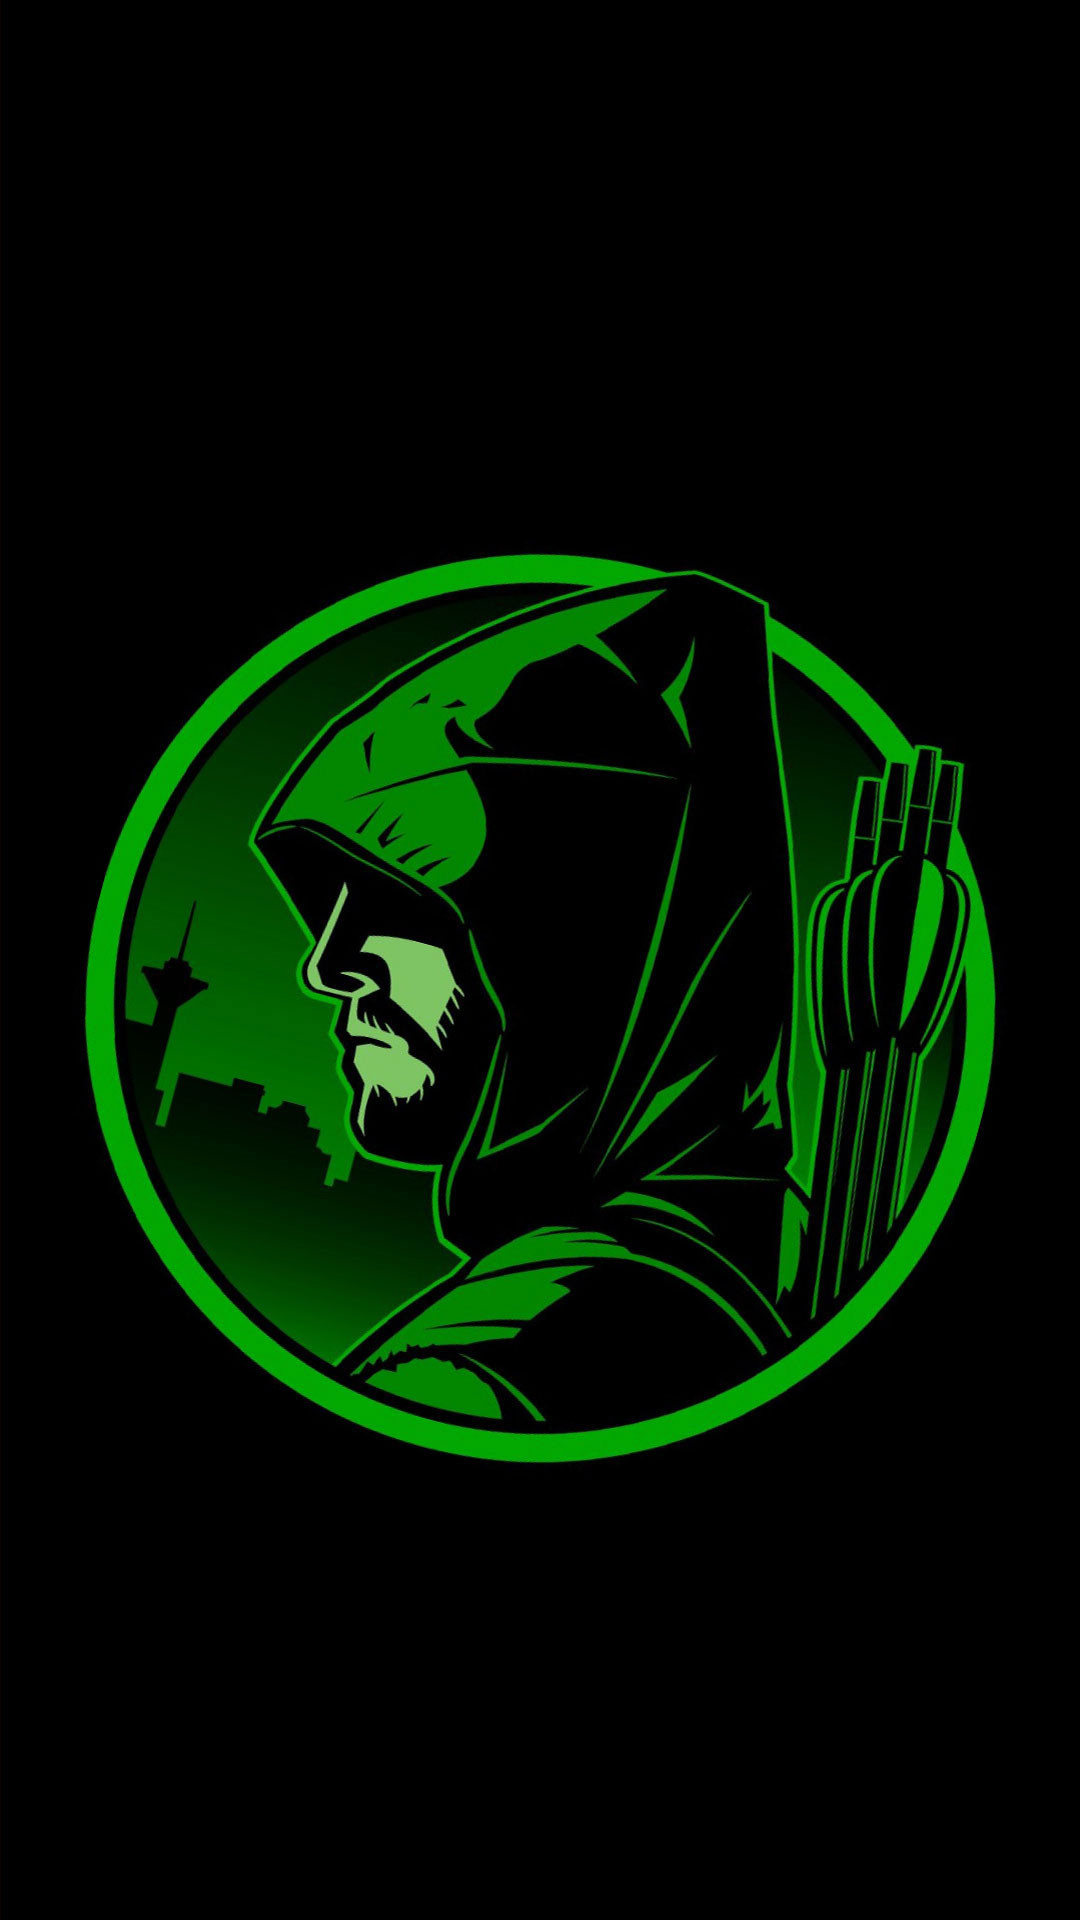 android n wallpaper 1080p,green,fictional character,illustration,supervillain